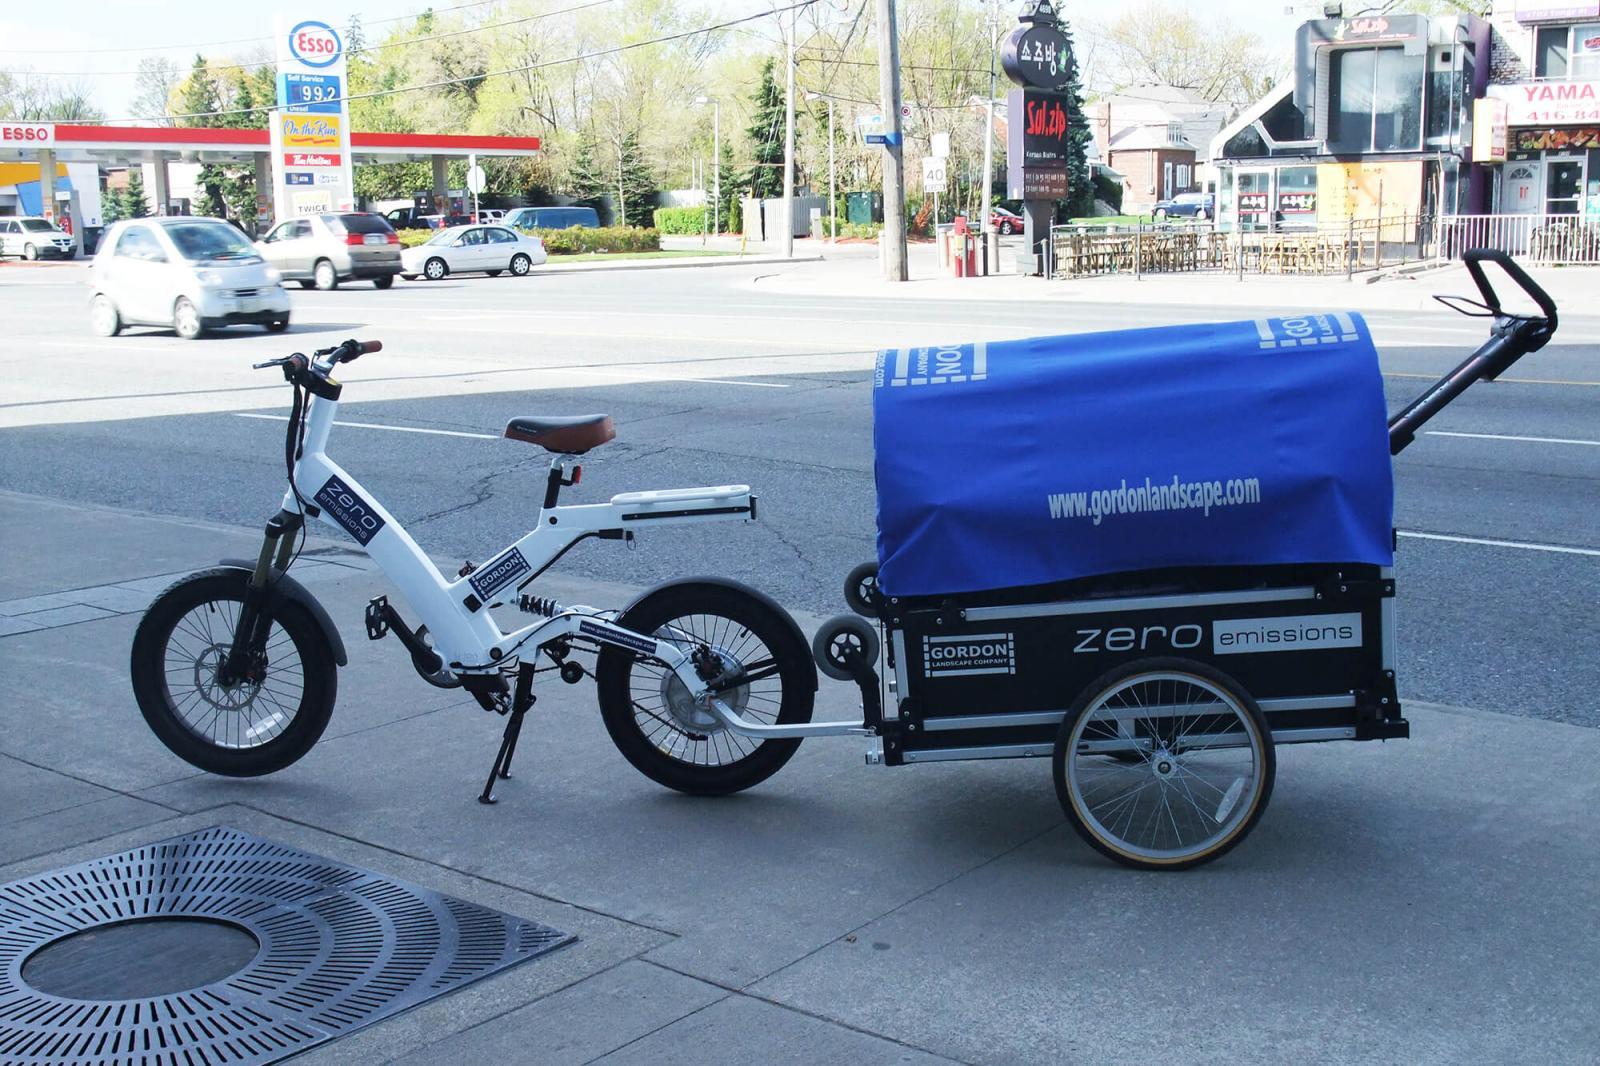 Street-legal electric bicycles are the mode of transportation for the Zero Emissions Team.